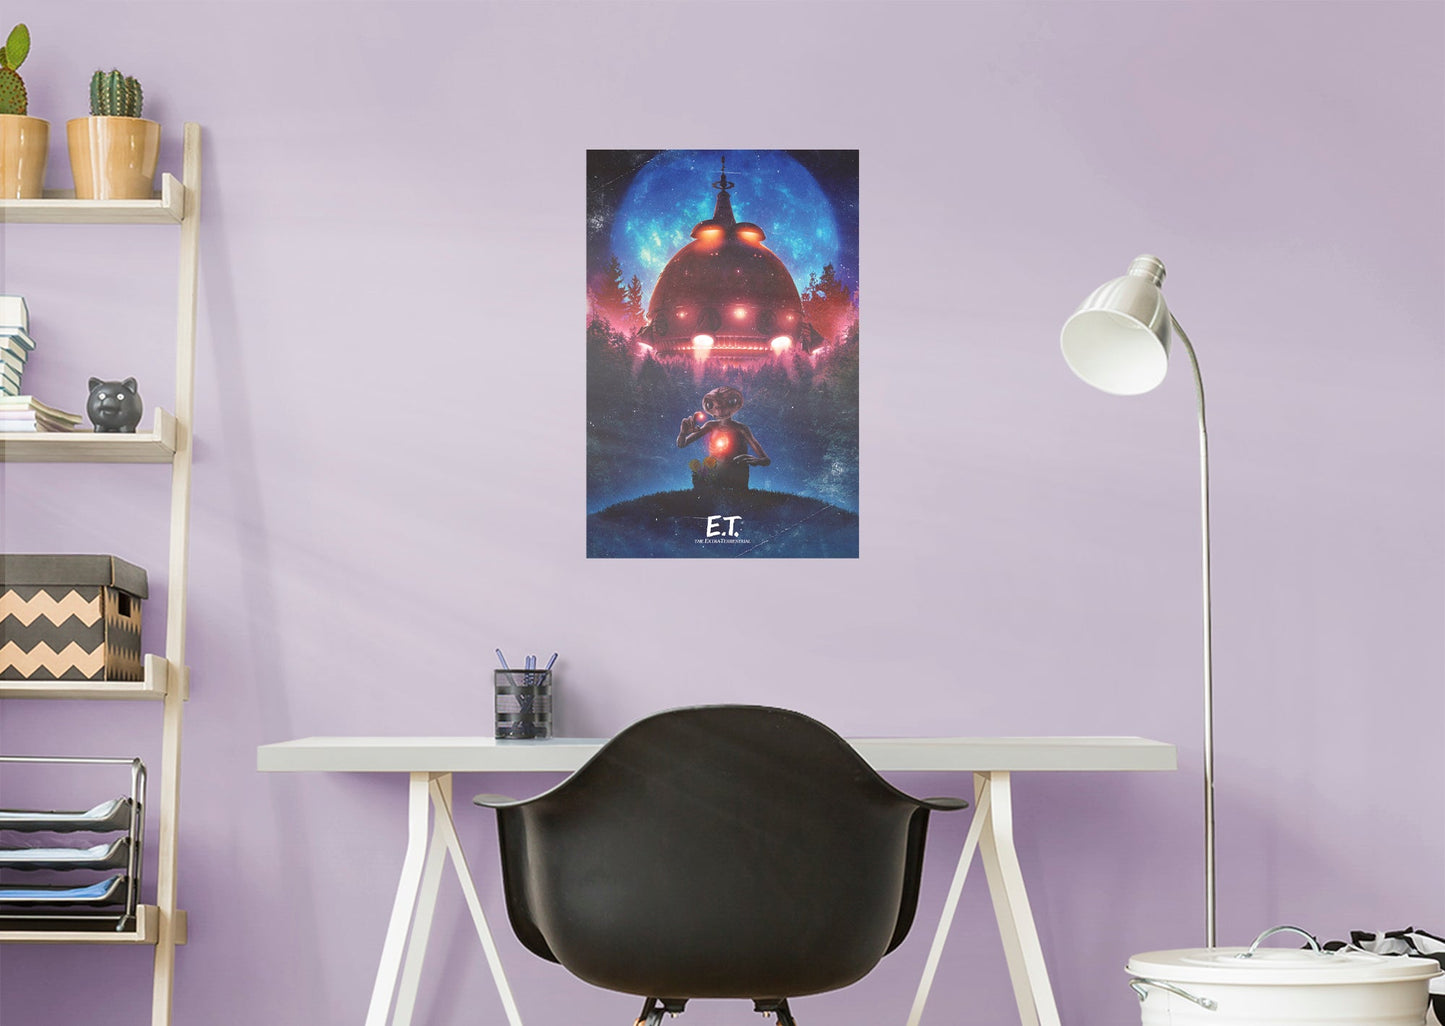 E.T.: E.T. Spacecraft 40th Anniversary Poster - Officially Licensed NBC Universal Removable Adhesive Decal